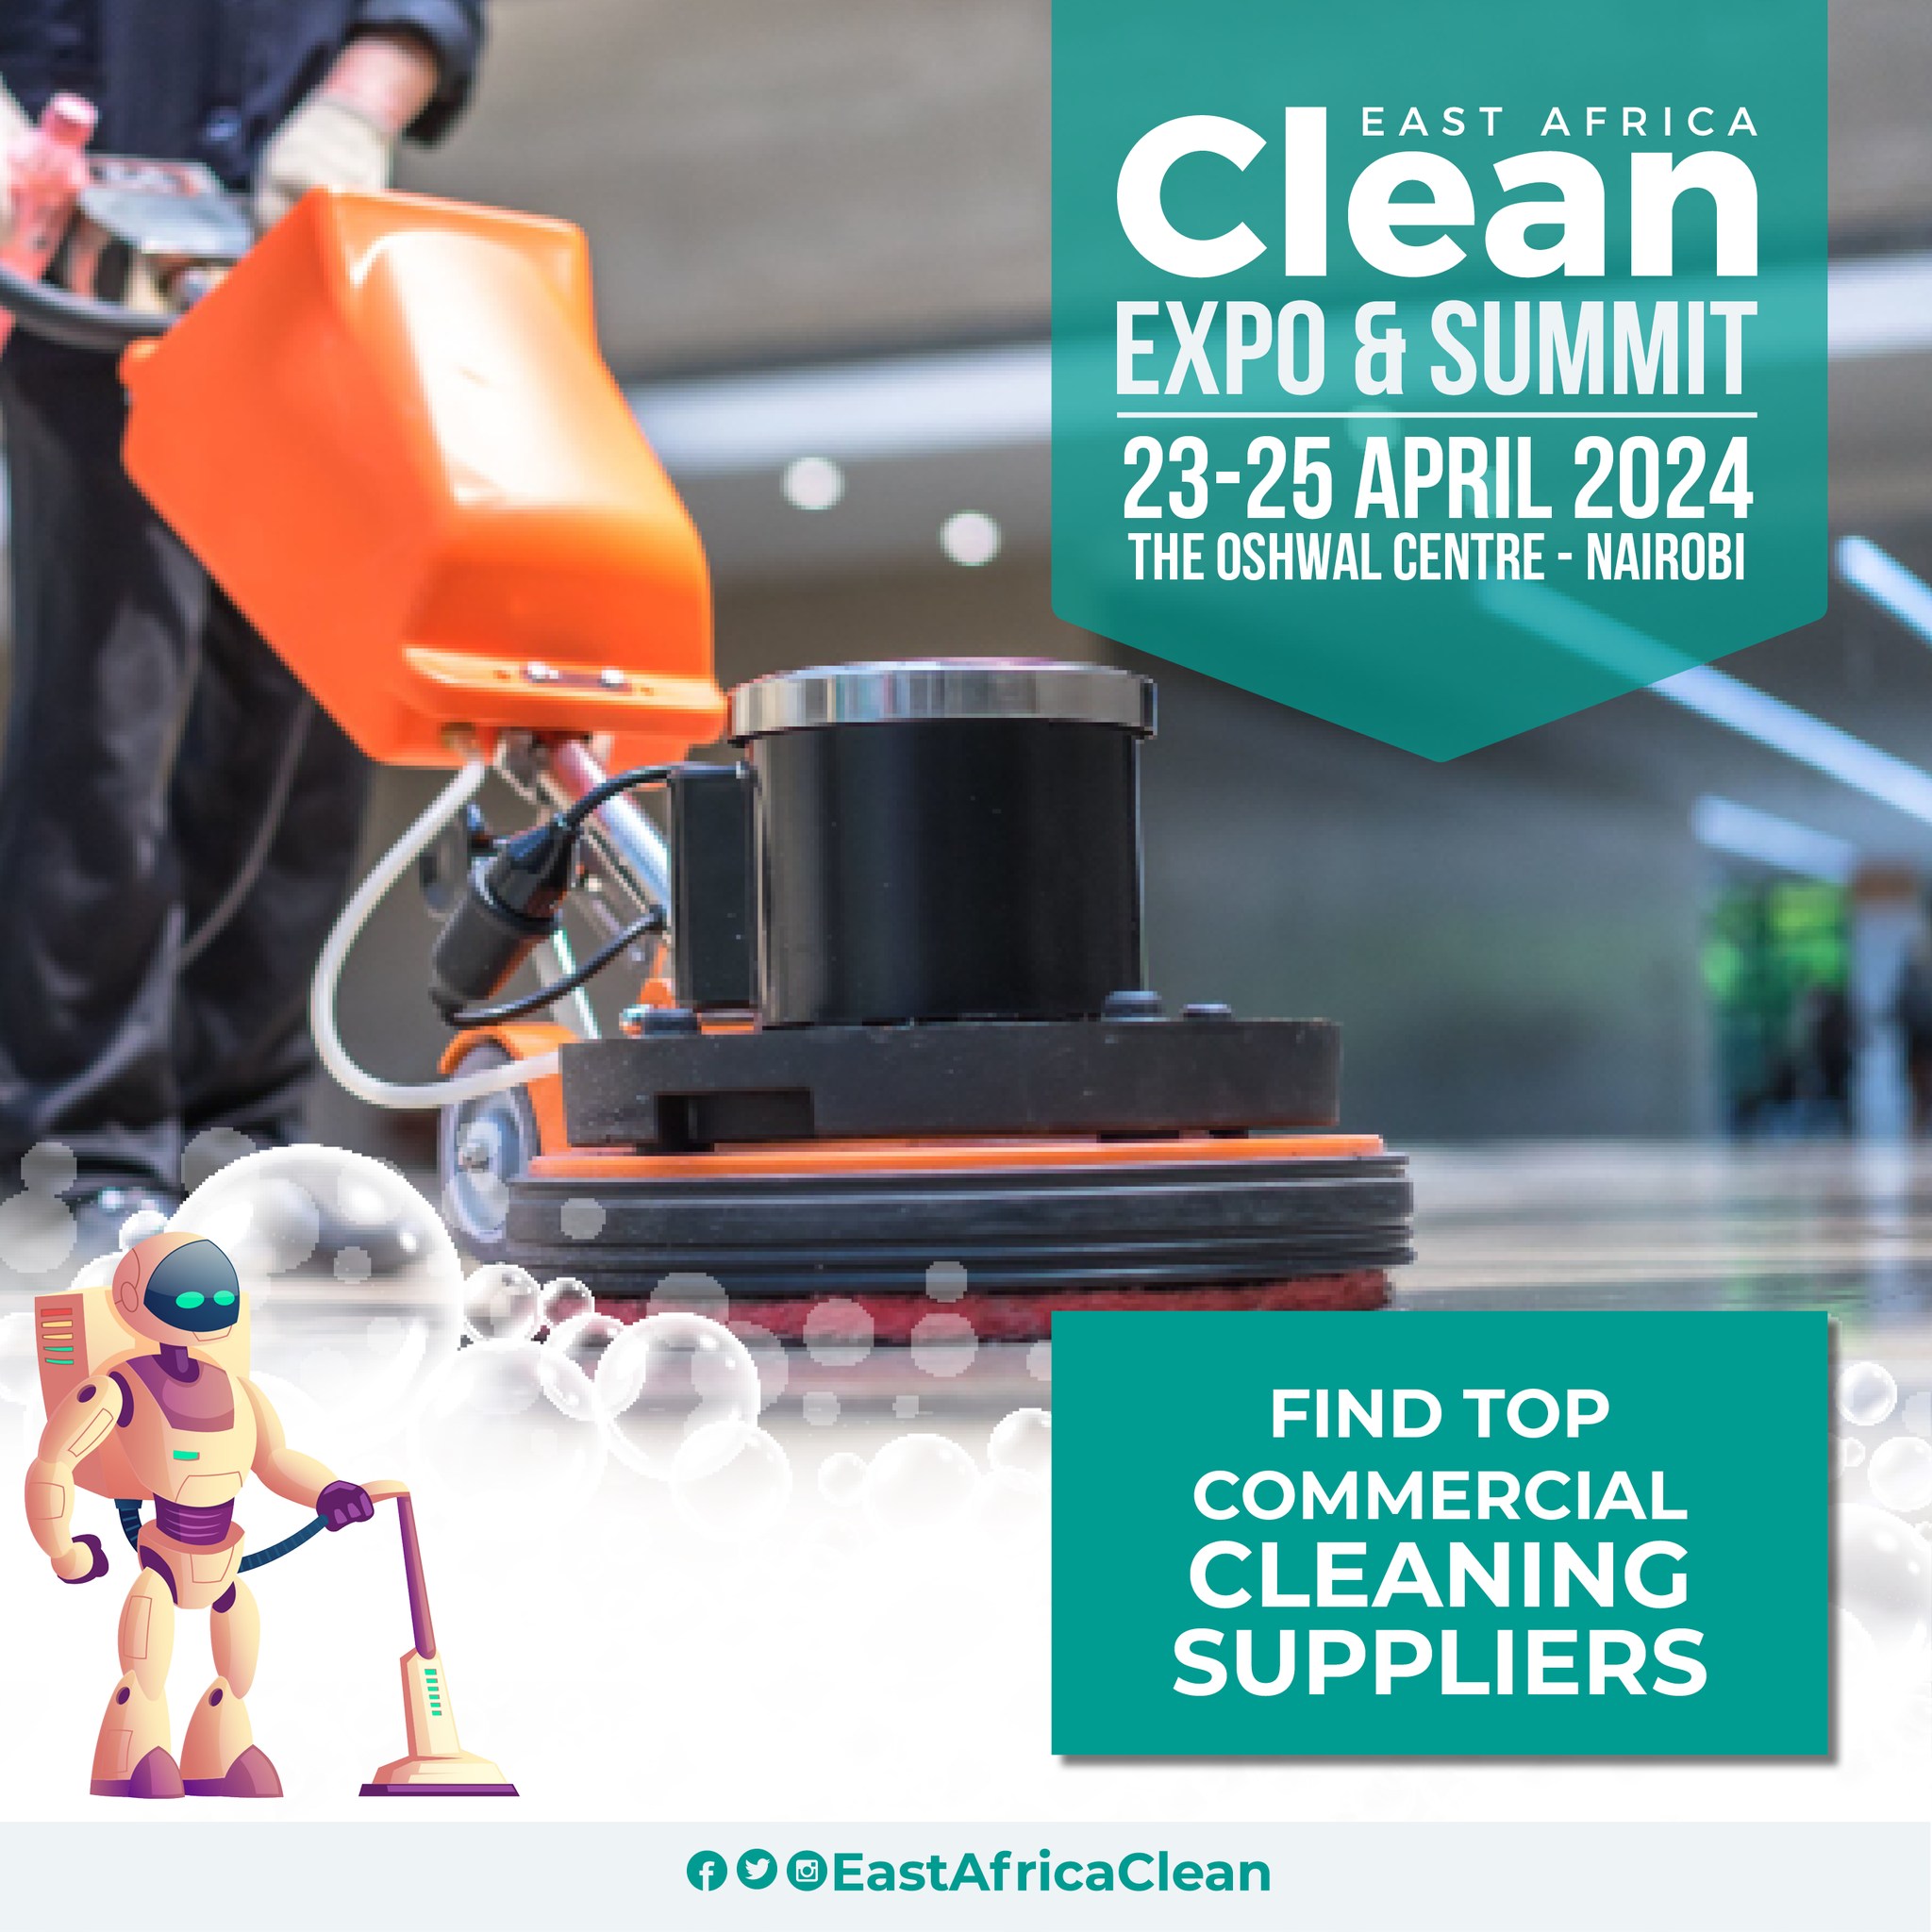 East Africa Clean Expo & Summit 2024